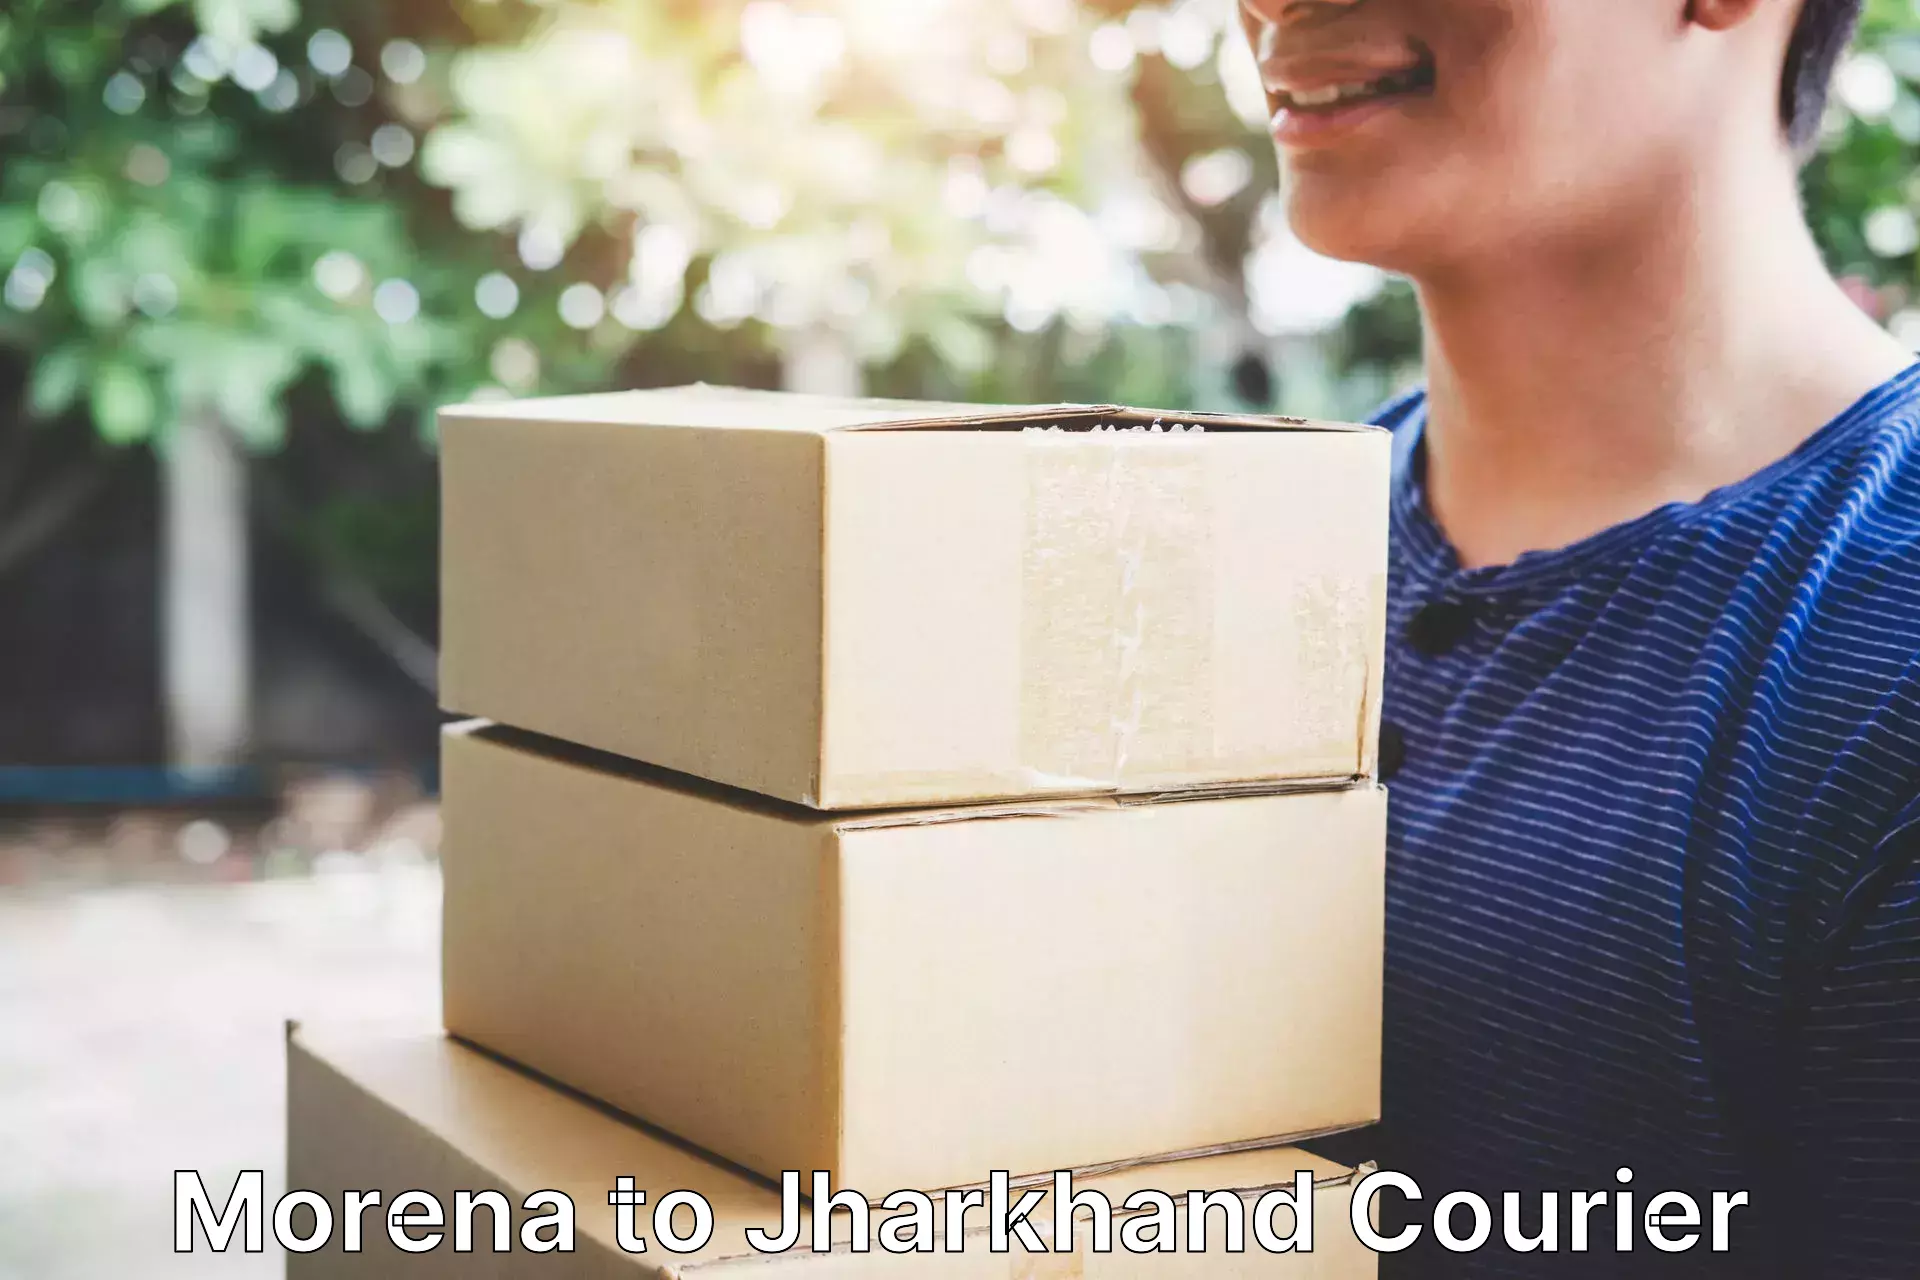 Express delivery capabilities Morena to Jharkhand